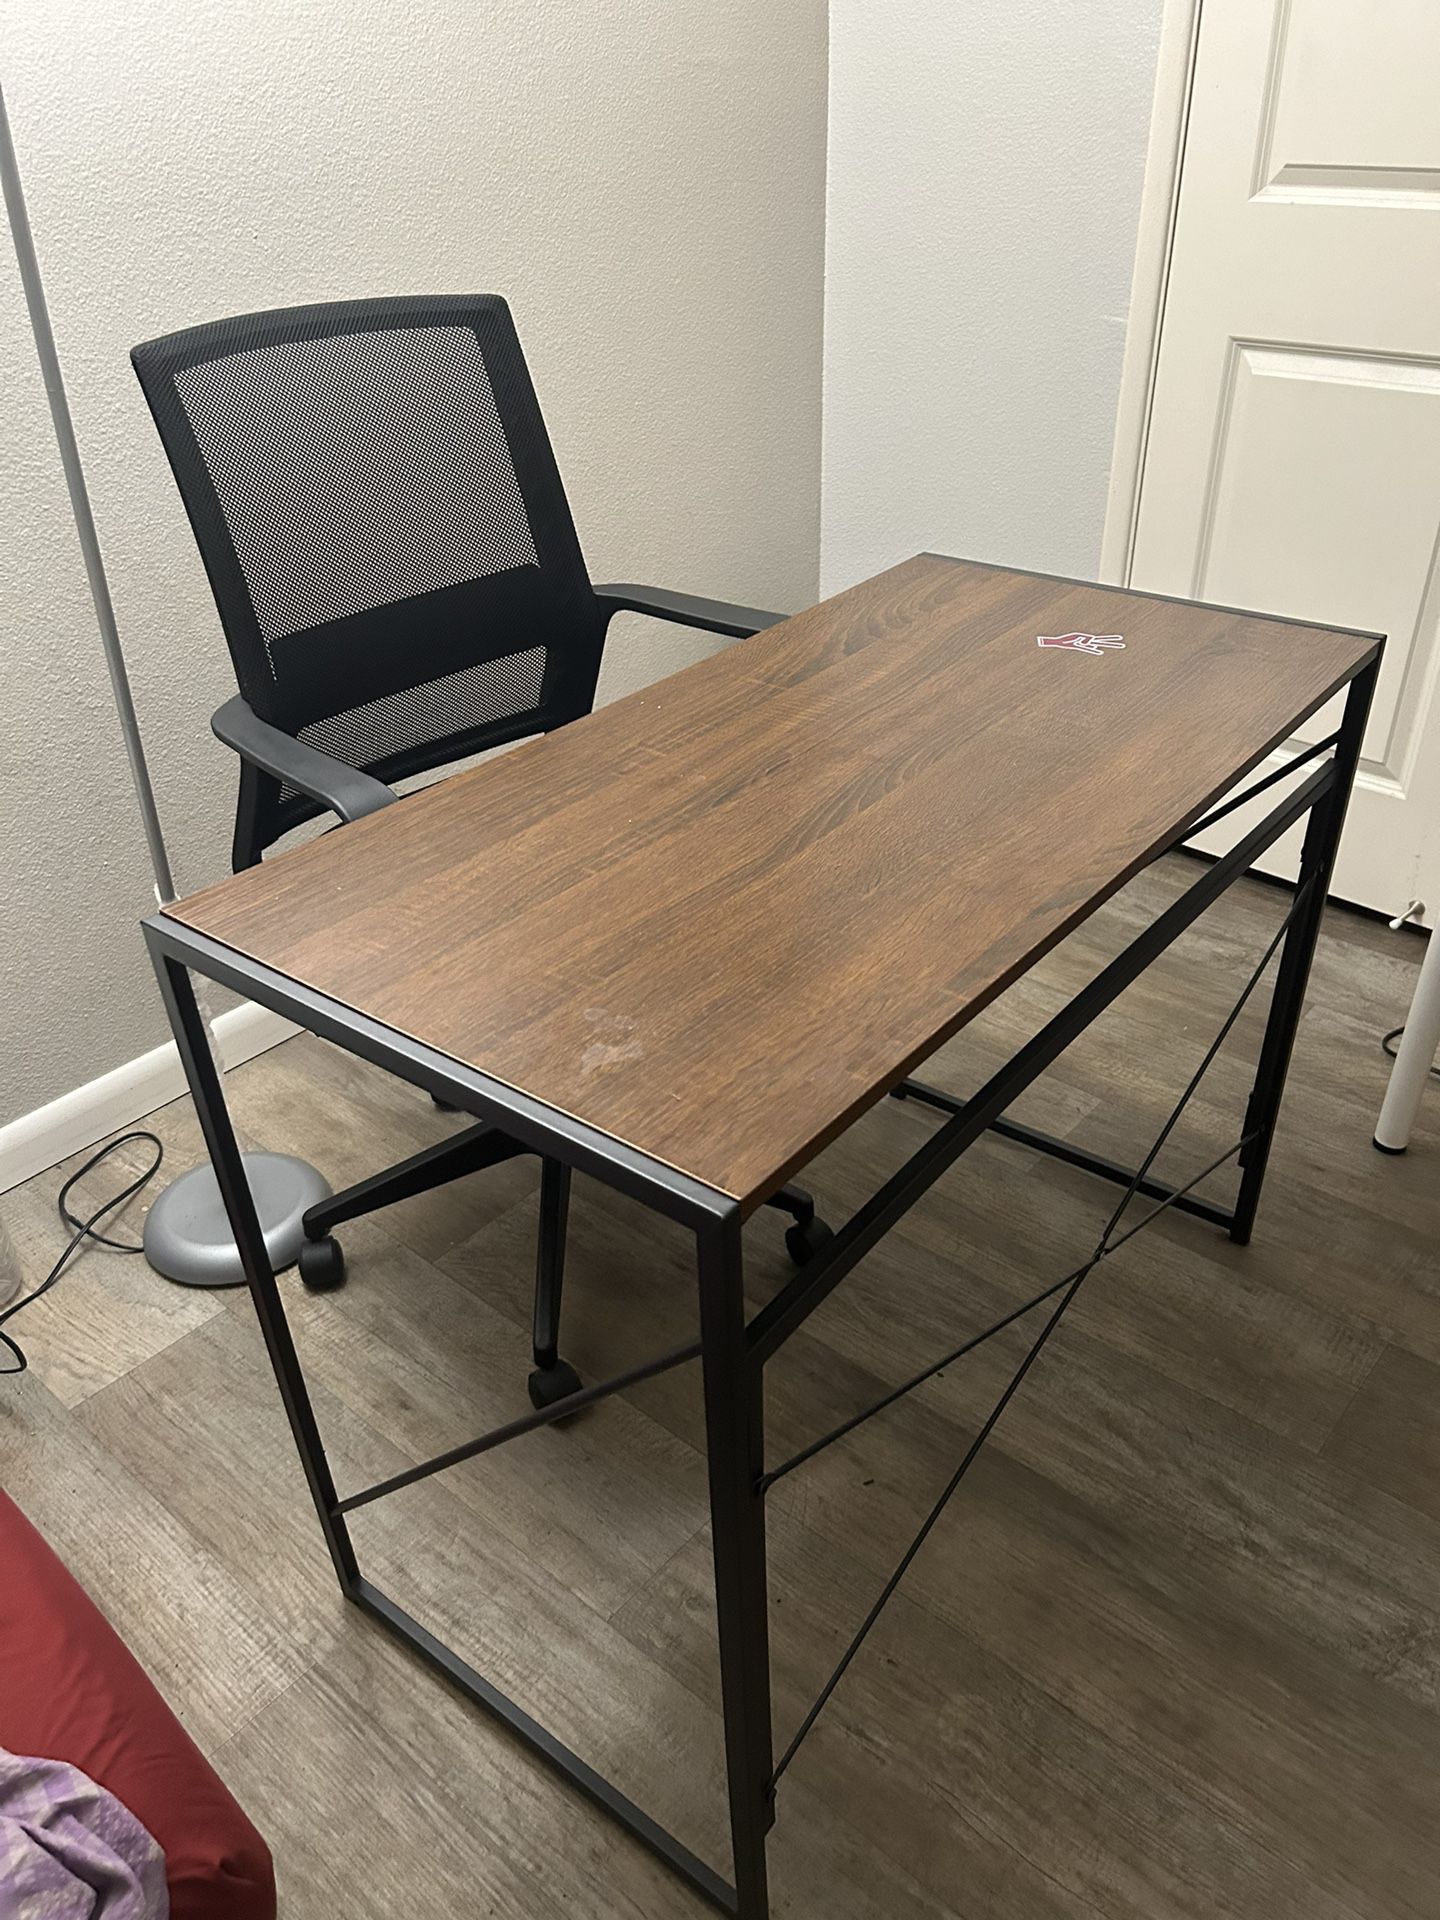 Table And Chair For Sale